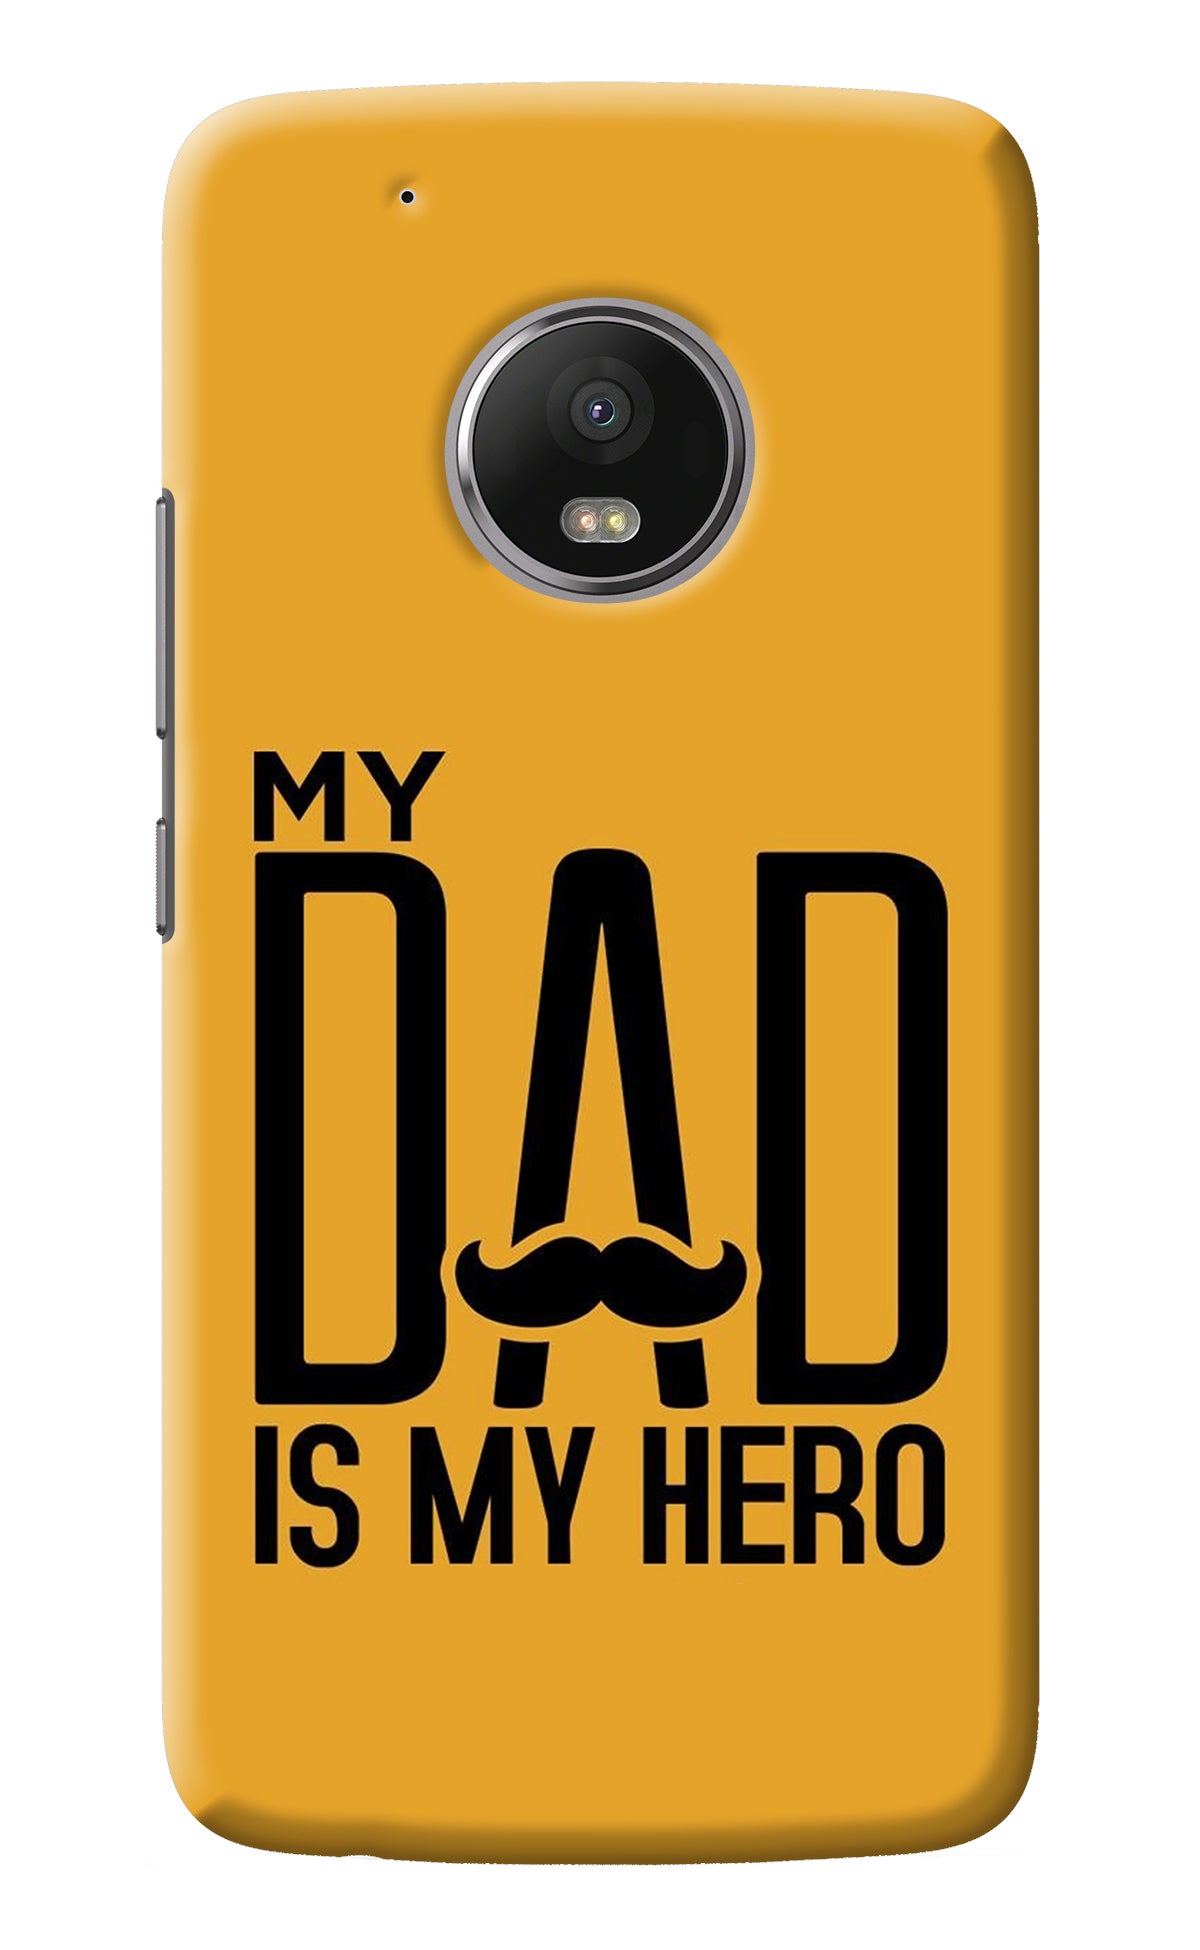 My Dad Is My Hero Moto G5 plus Back Cover